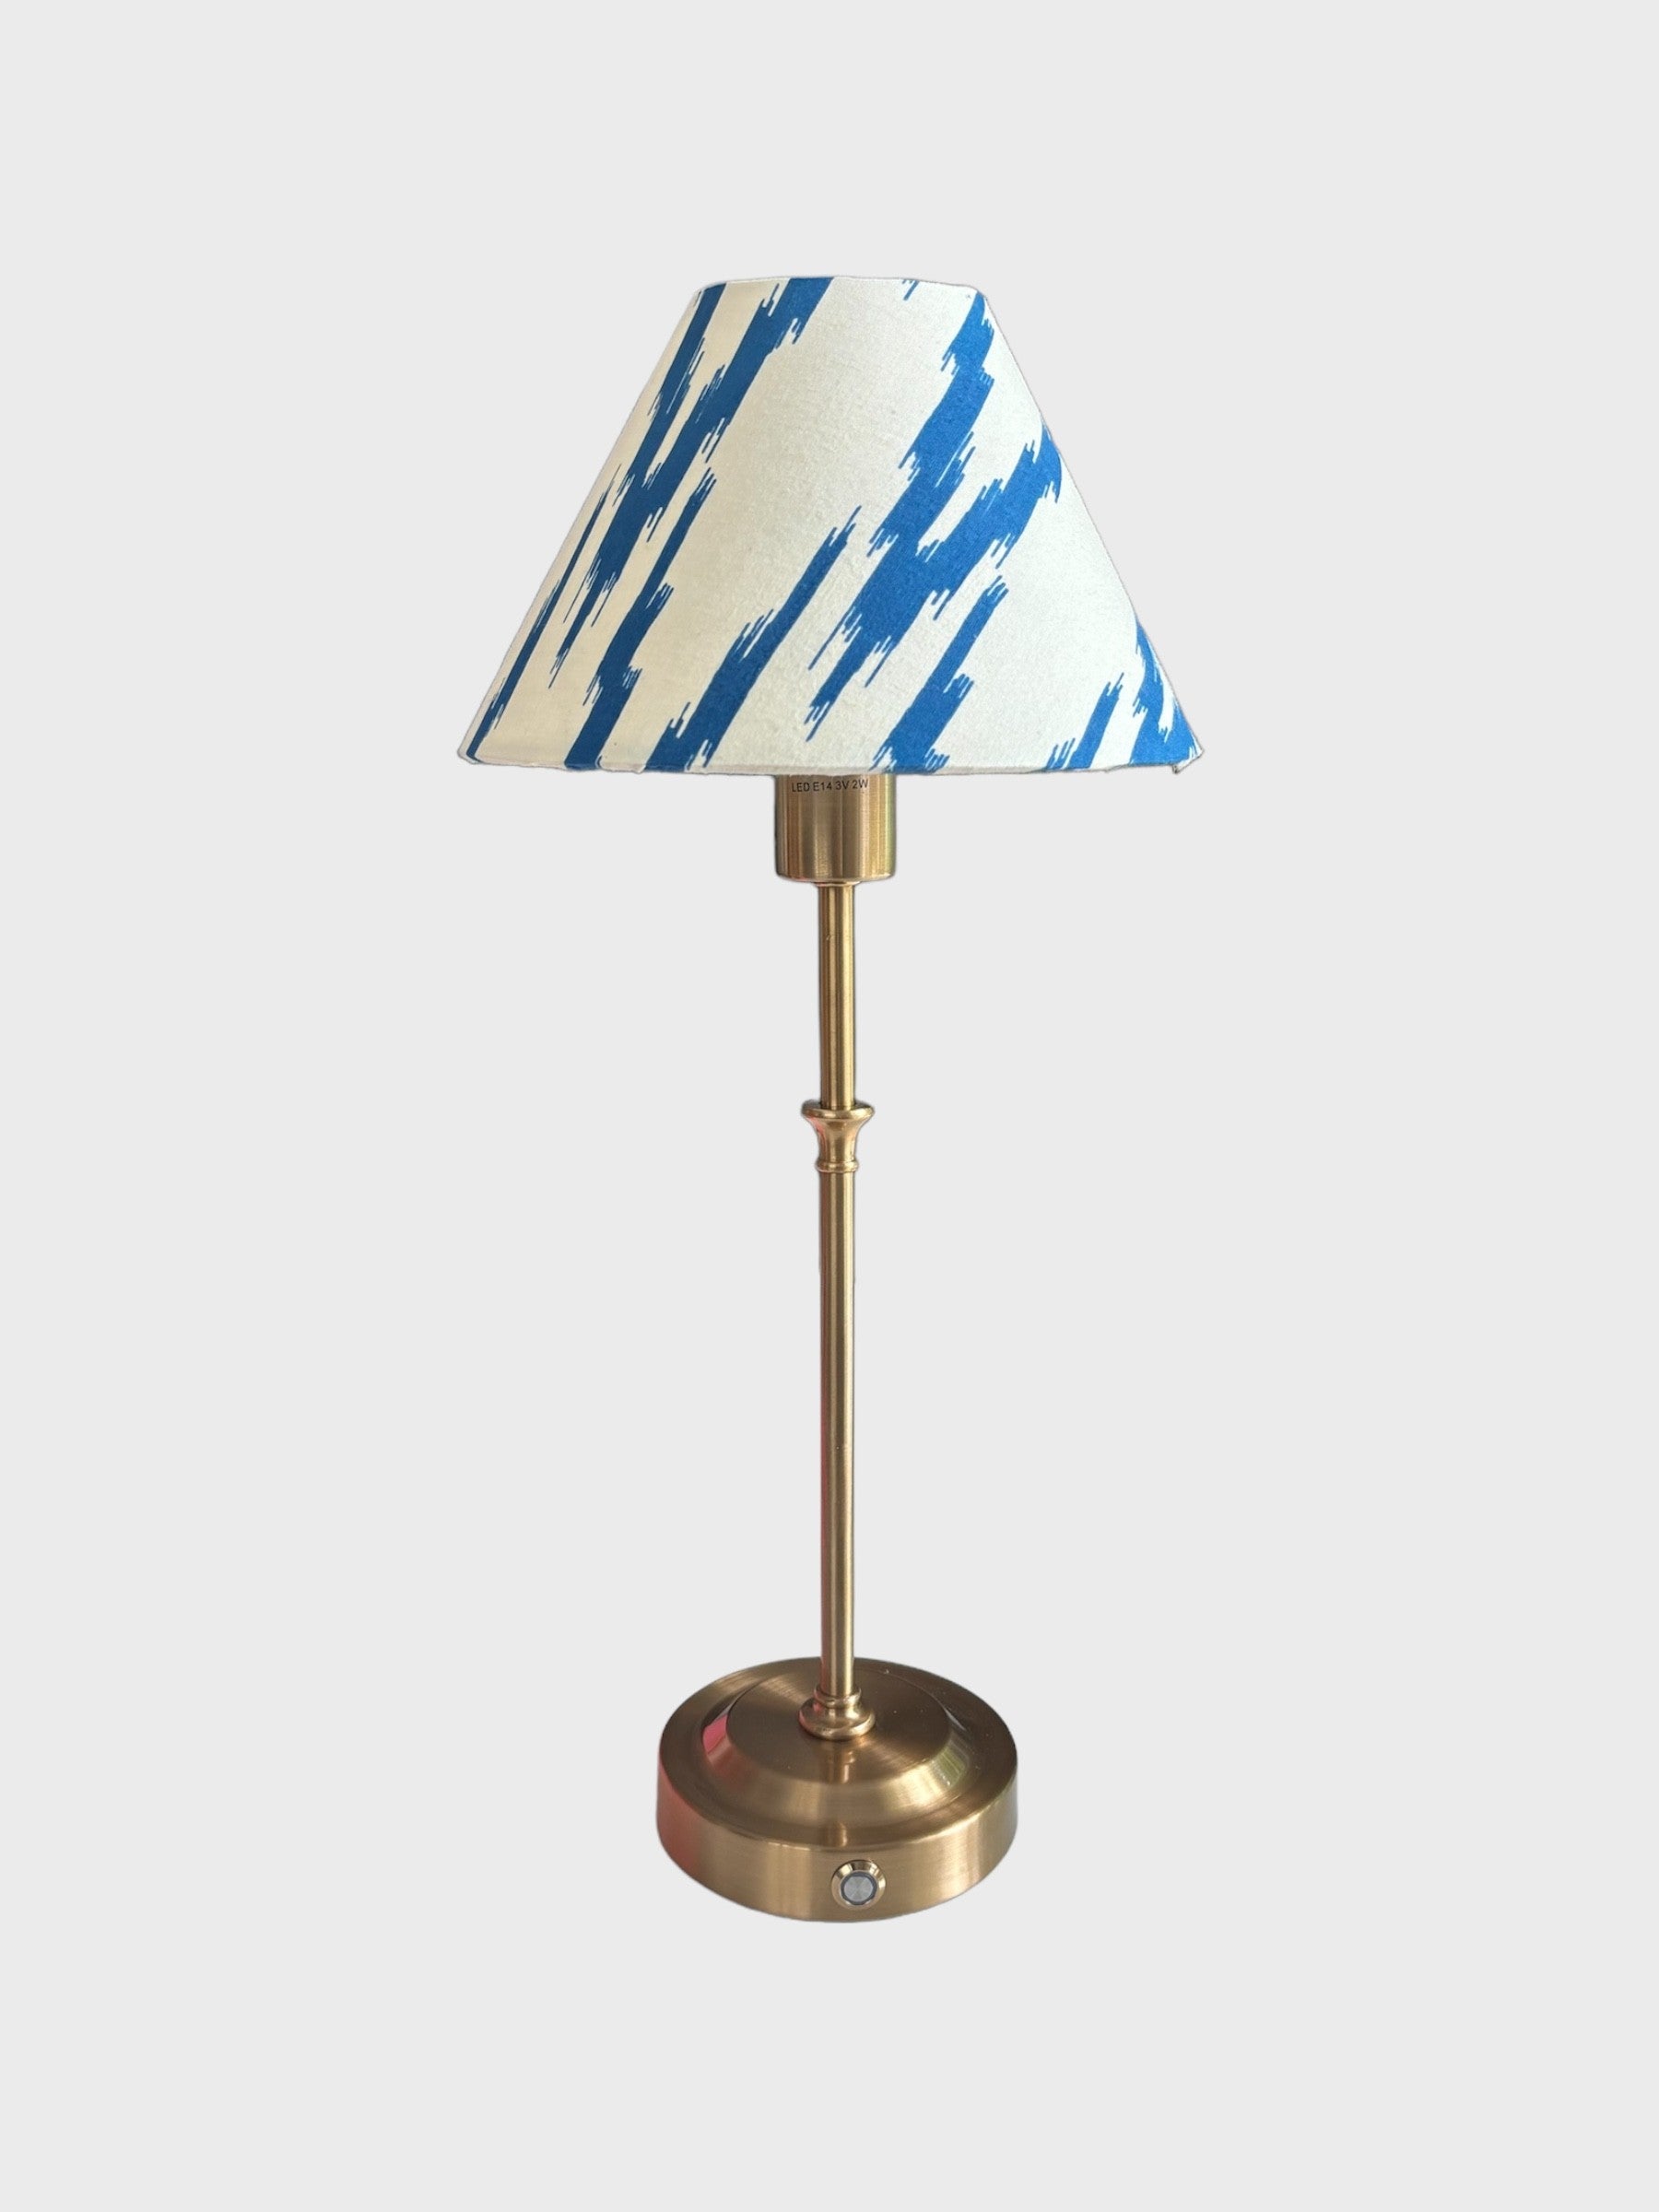 A cordless, rechargeable lamp with a handmade blue and white ikat shade.